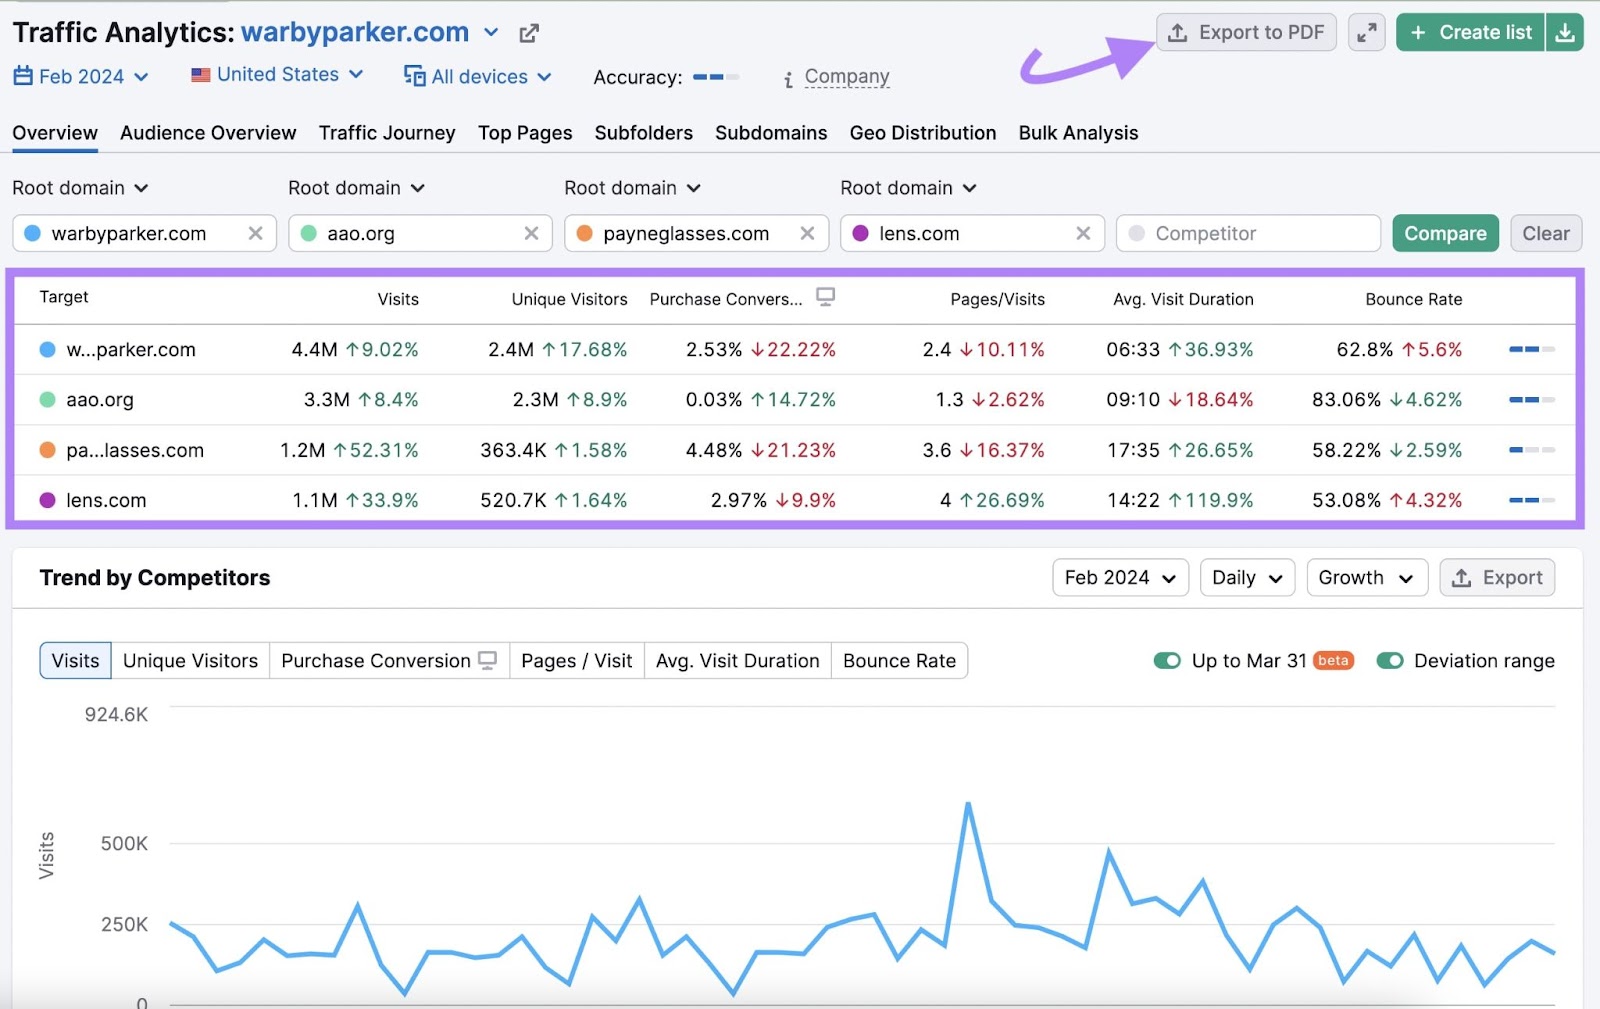 Traffic Analytics tool showing website traffic metrics for the domains entered above with "Export to PDF" button highlighted